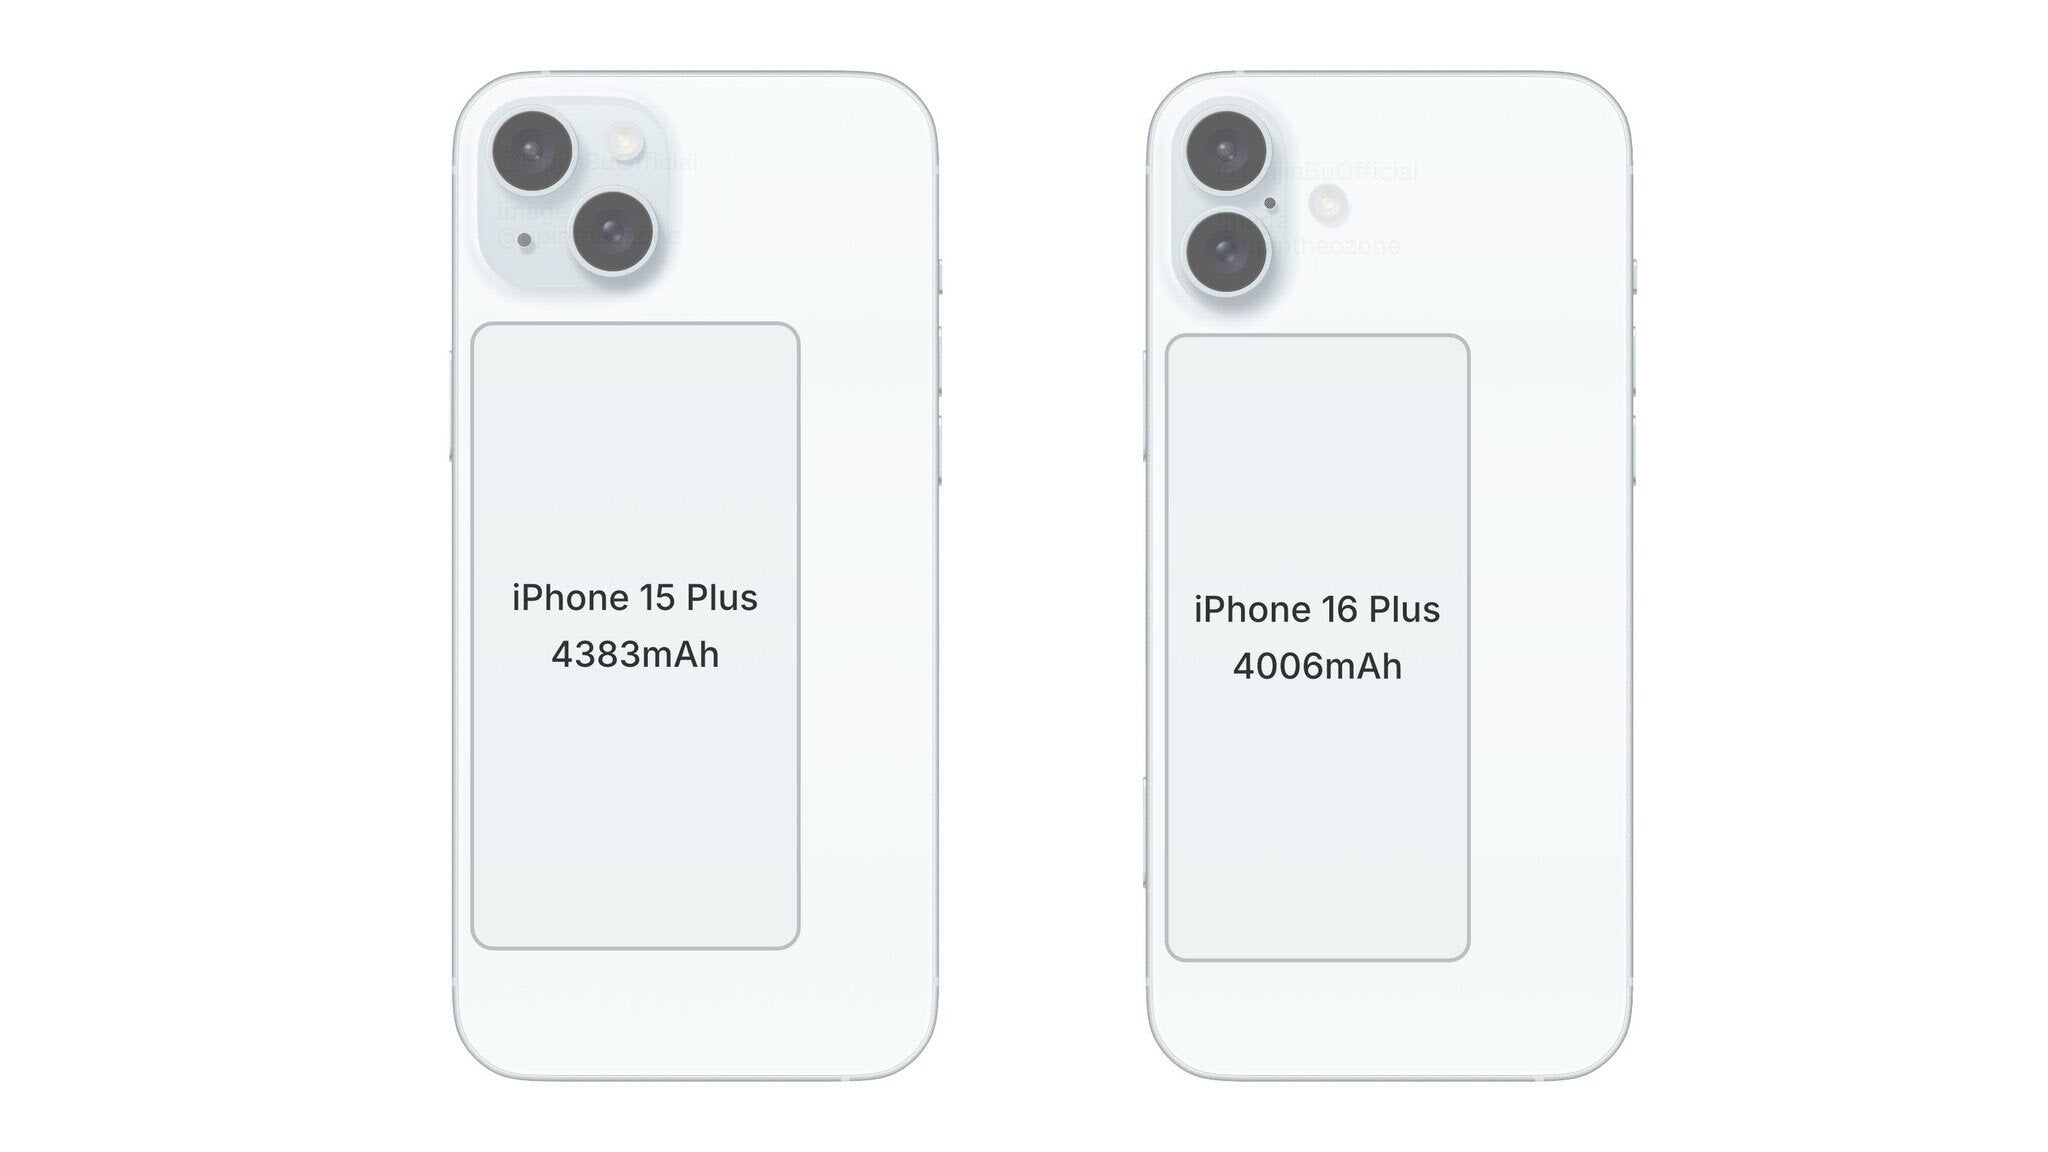 Latest comparison between iPhone 15 and iPhone 16 shows the difference in battery capacities